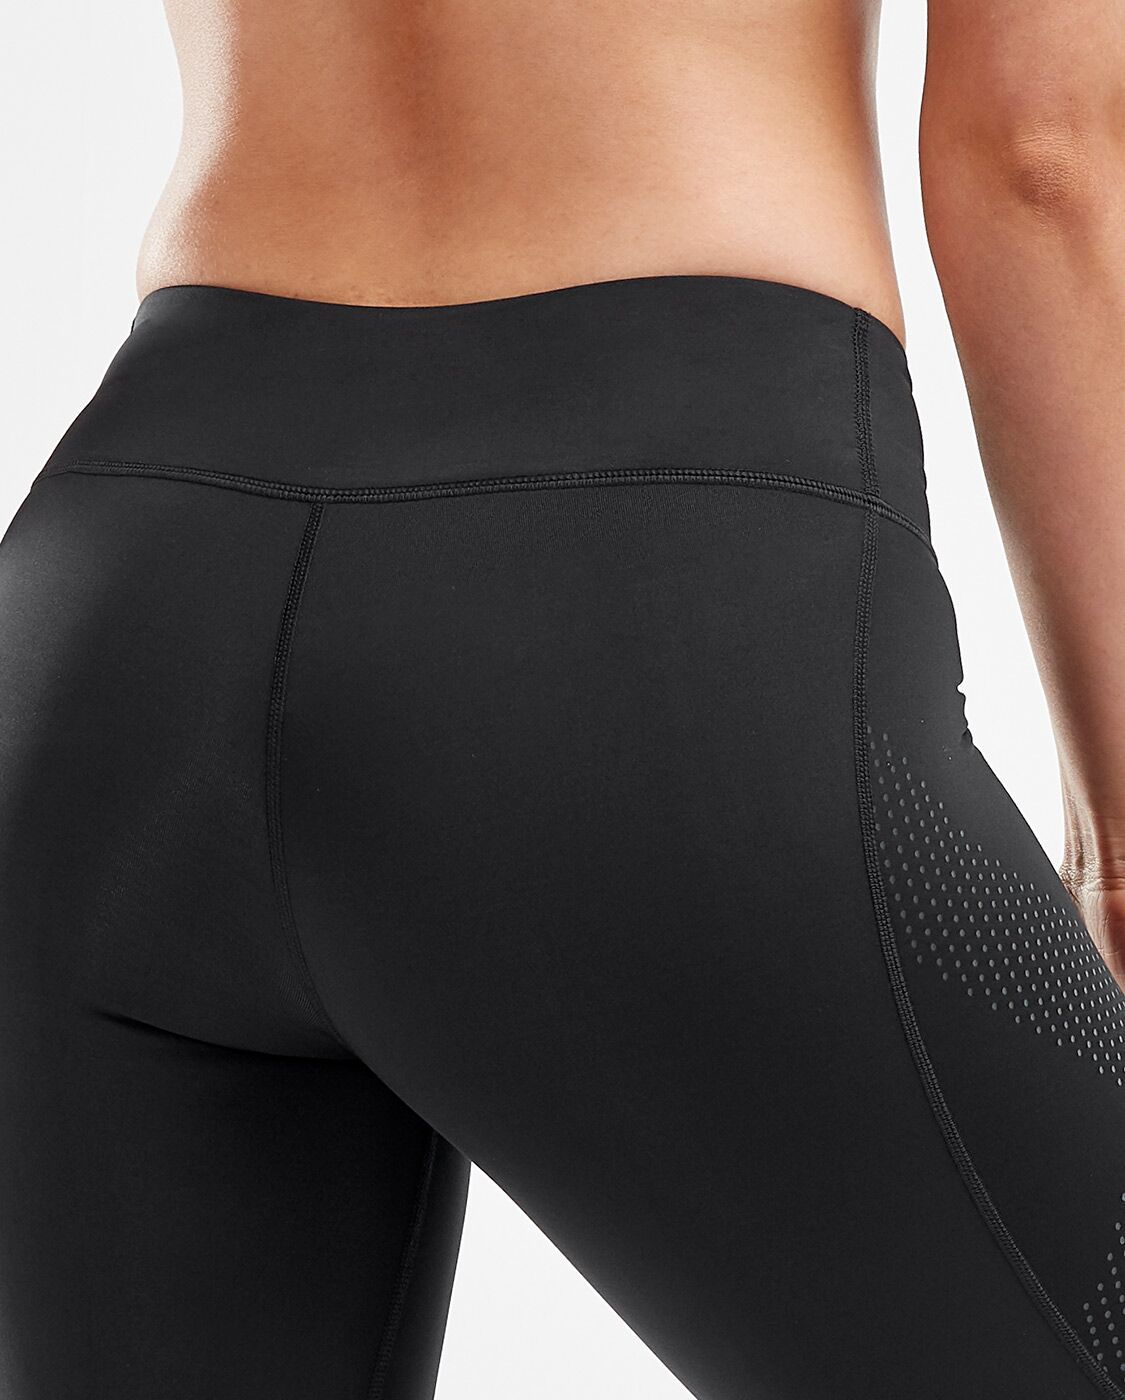 2XU South Africa - Women's Motion Mid-Rise Compression Tights - Black/Dotted Black Logo